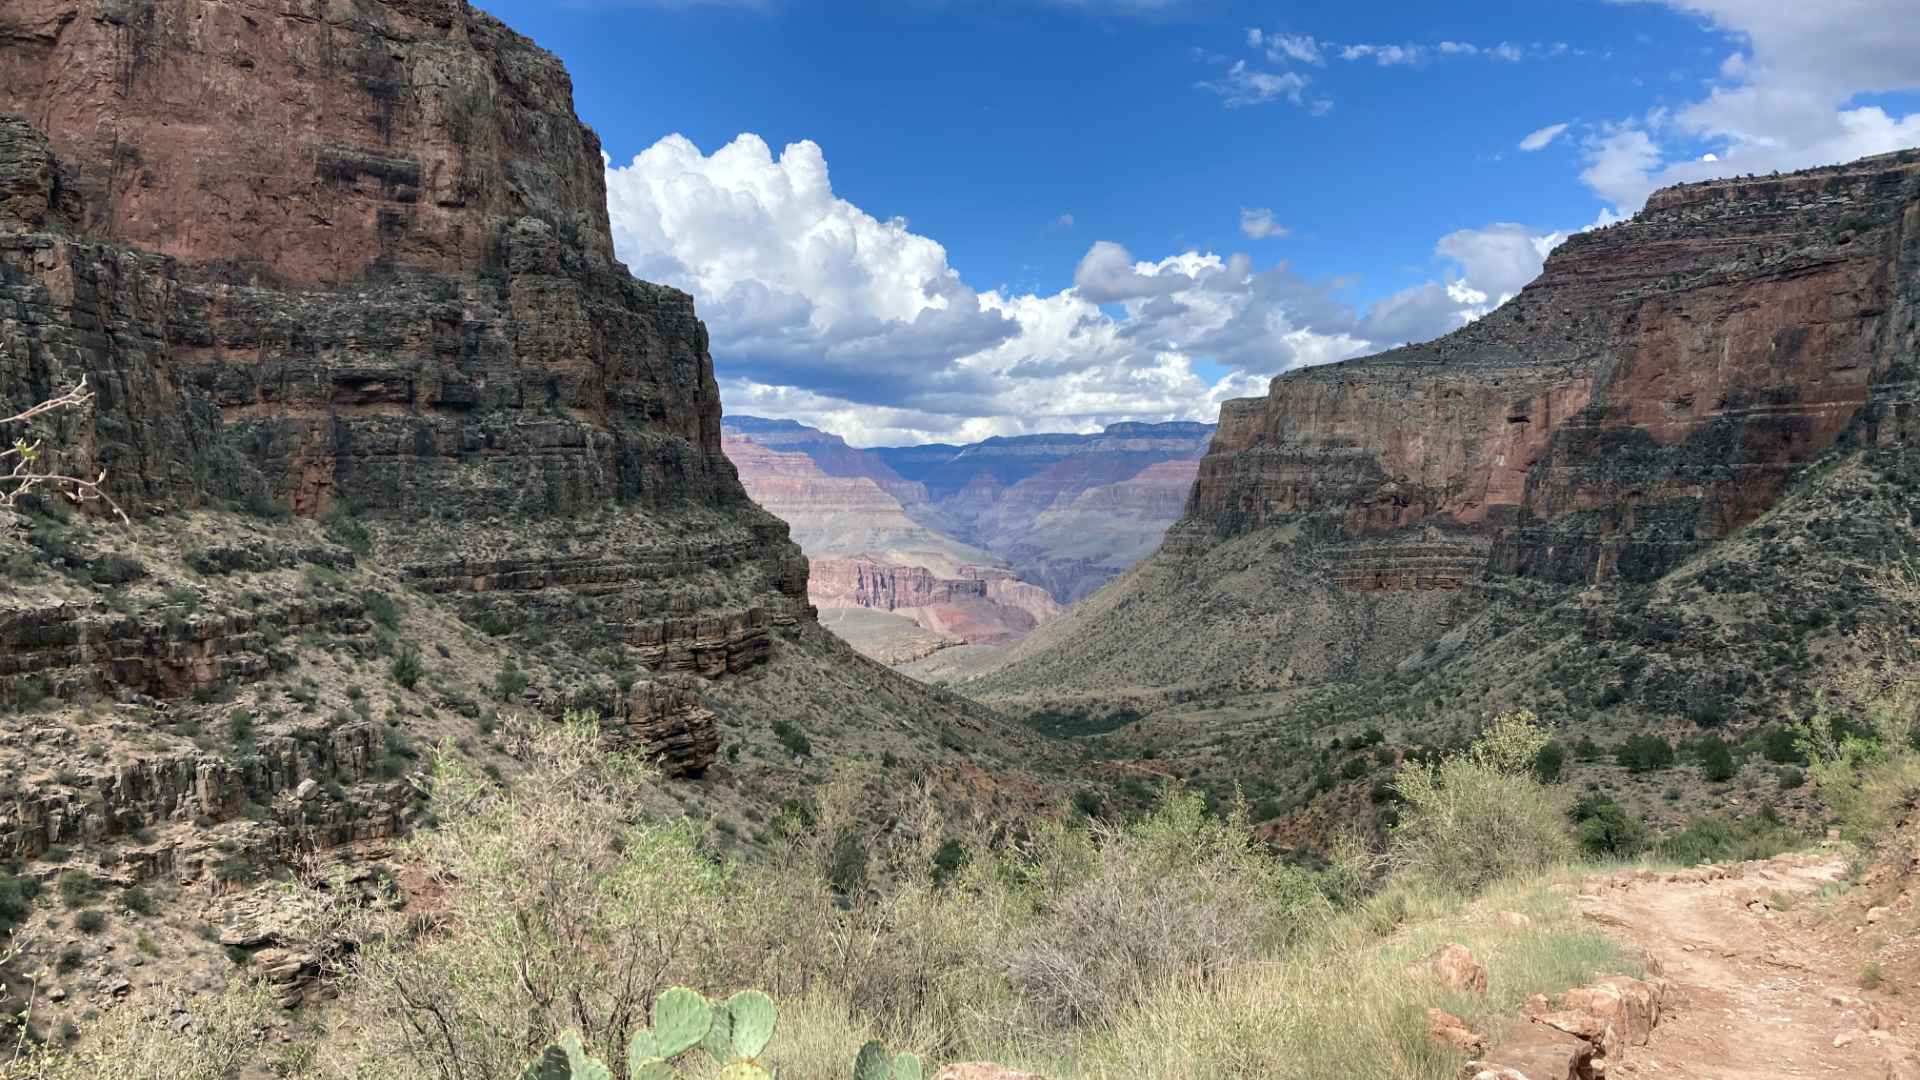 Our view five miles down the Bright Angel Trail at the Grand Canyon